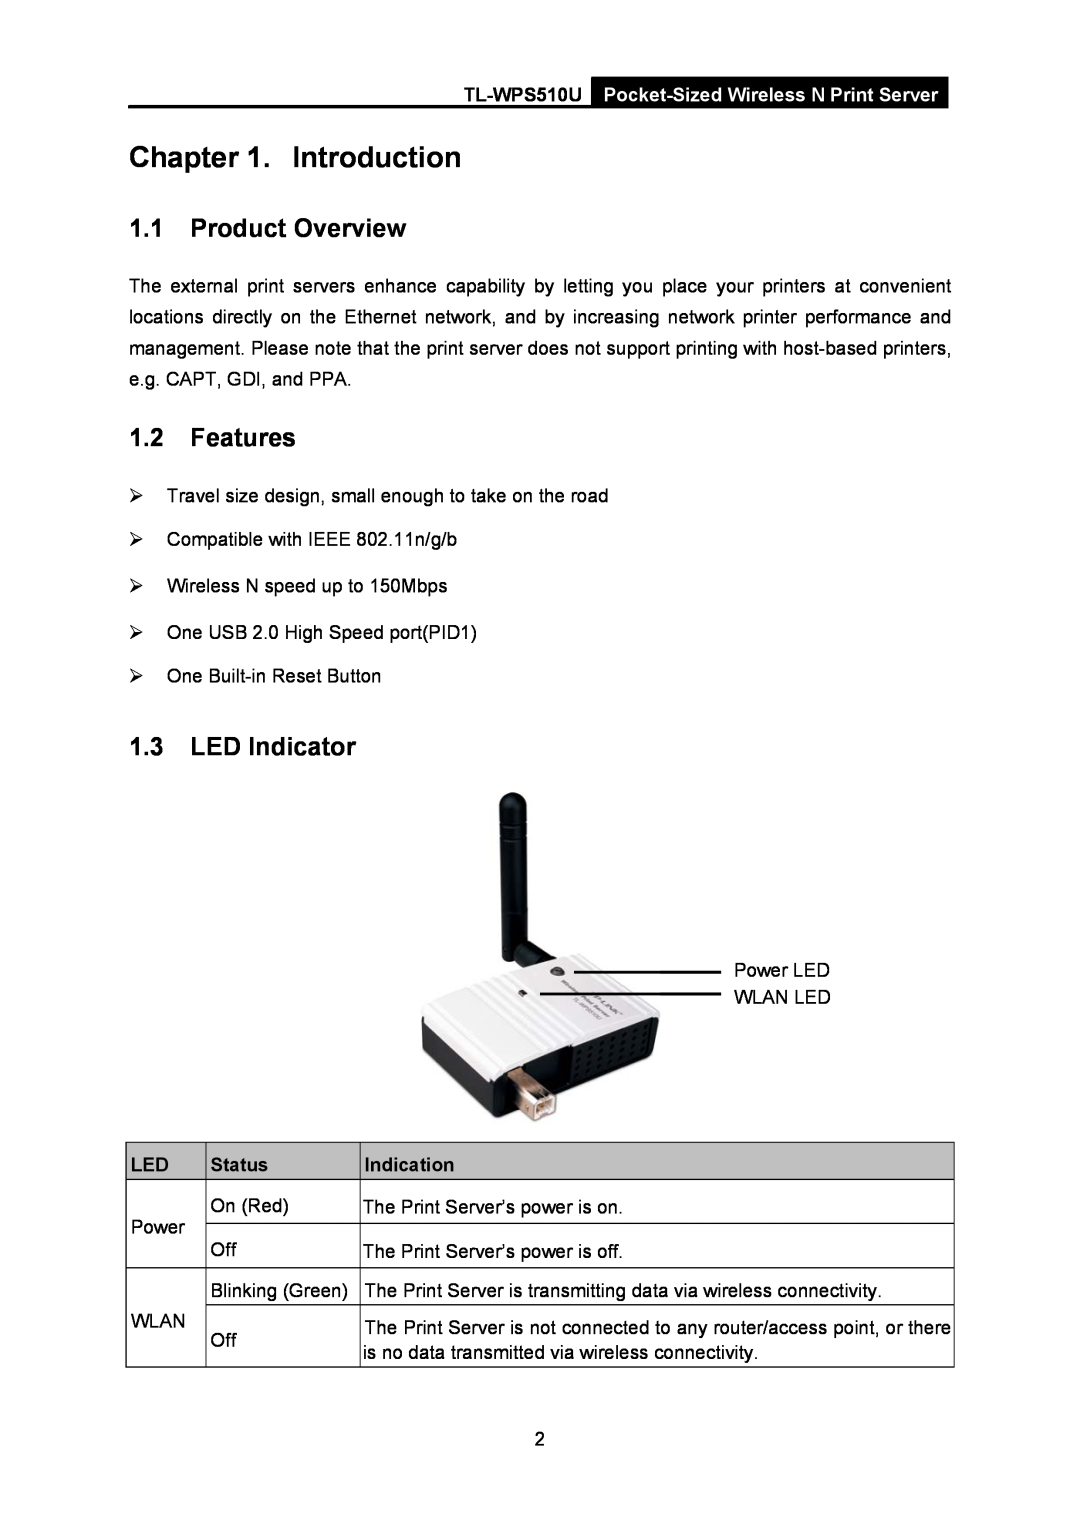 TP-Link tl-wps510u manual Introduction, Product Overview, Features, LED Indicator, Status, Indication 